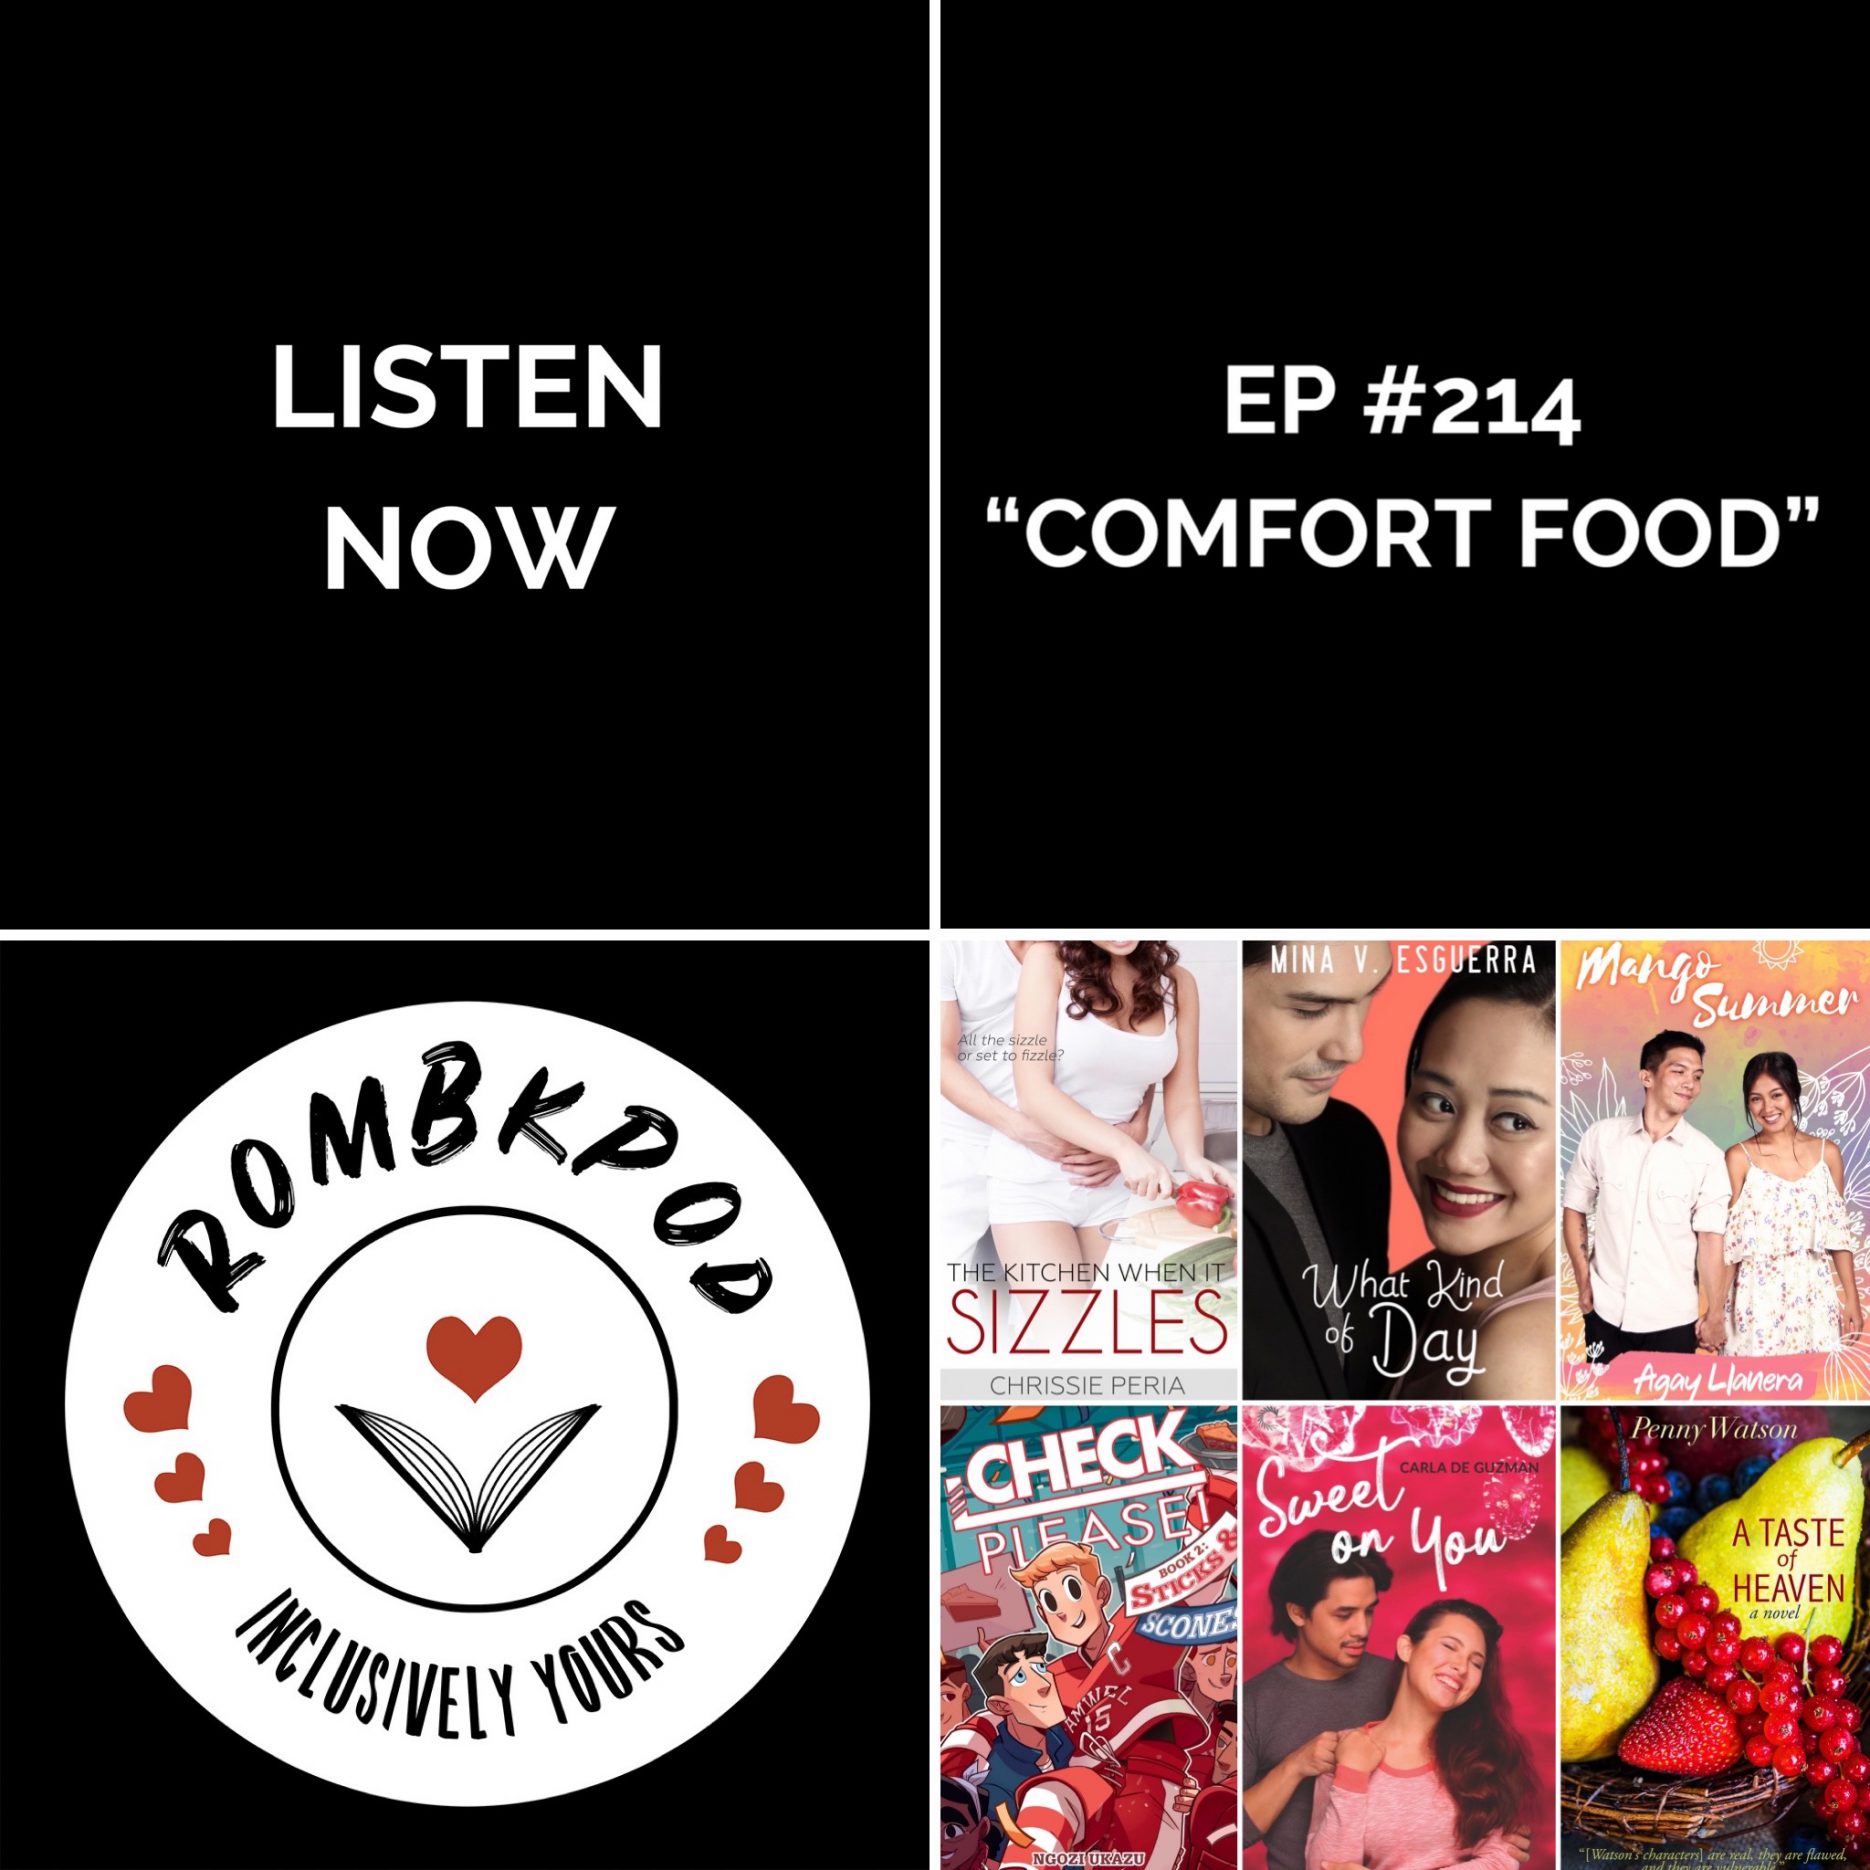 IMAGE: lower left corner, RomBkPod heart logo; lower right corner, ep #214 book cover collage; IMAGE TEXT: Listen Now, ep #214 "Comfort Food"